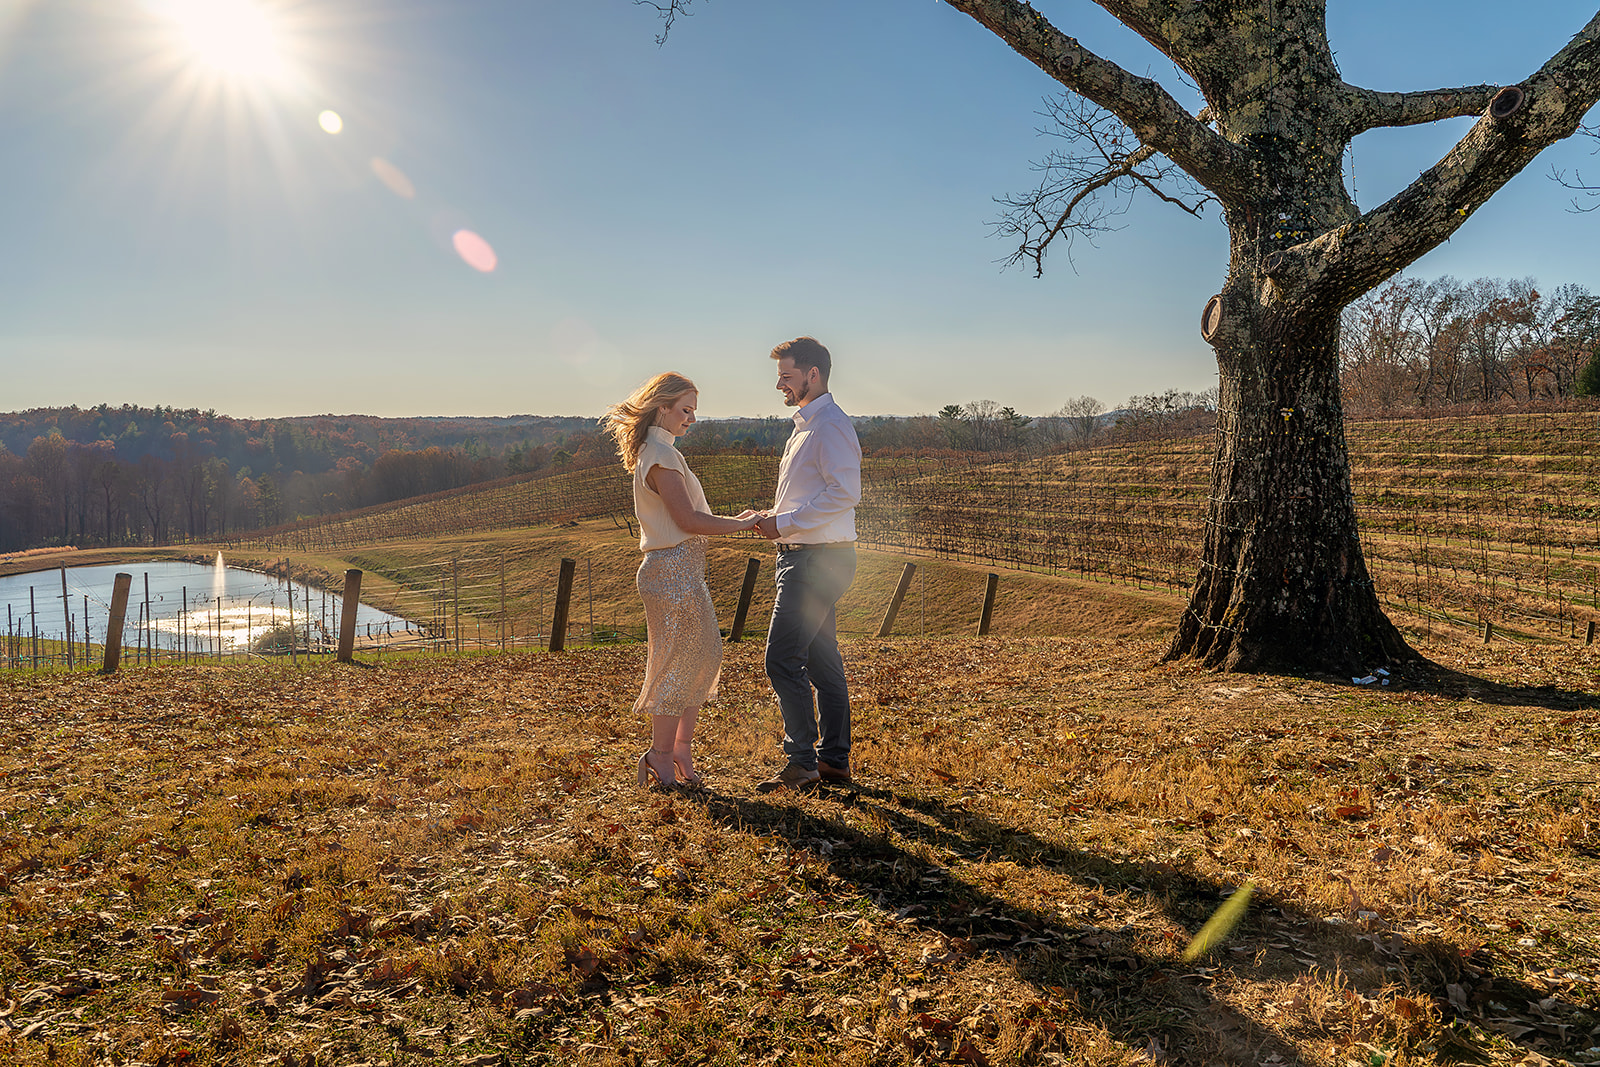 Surprise proposal at Montaluce Winery and Restaurant in Dahlonega, GA | Editorial Portraits by Hamer Visuals